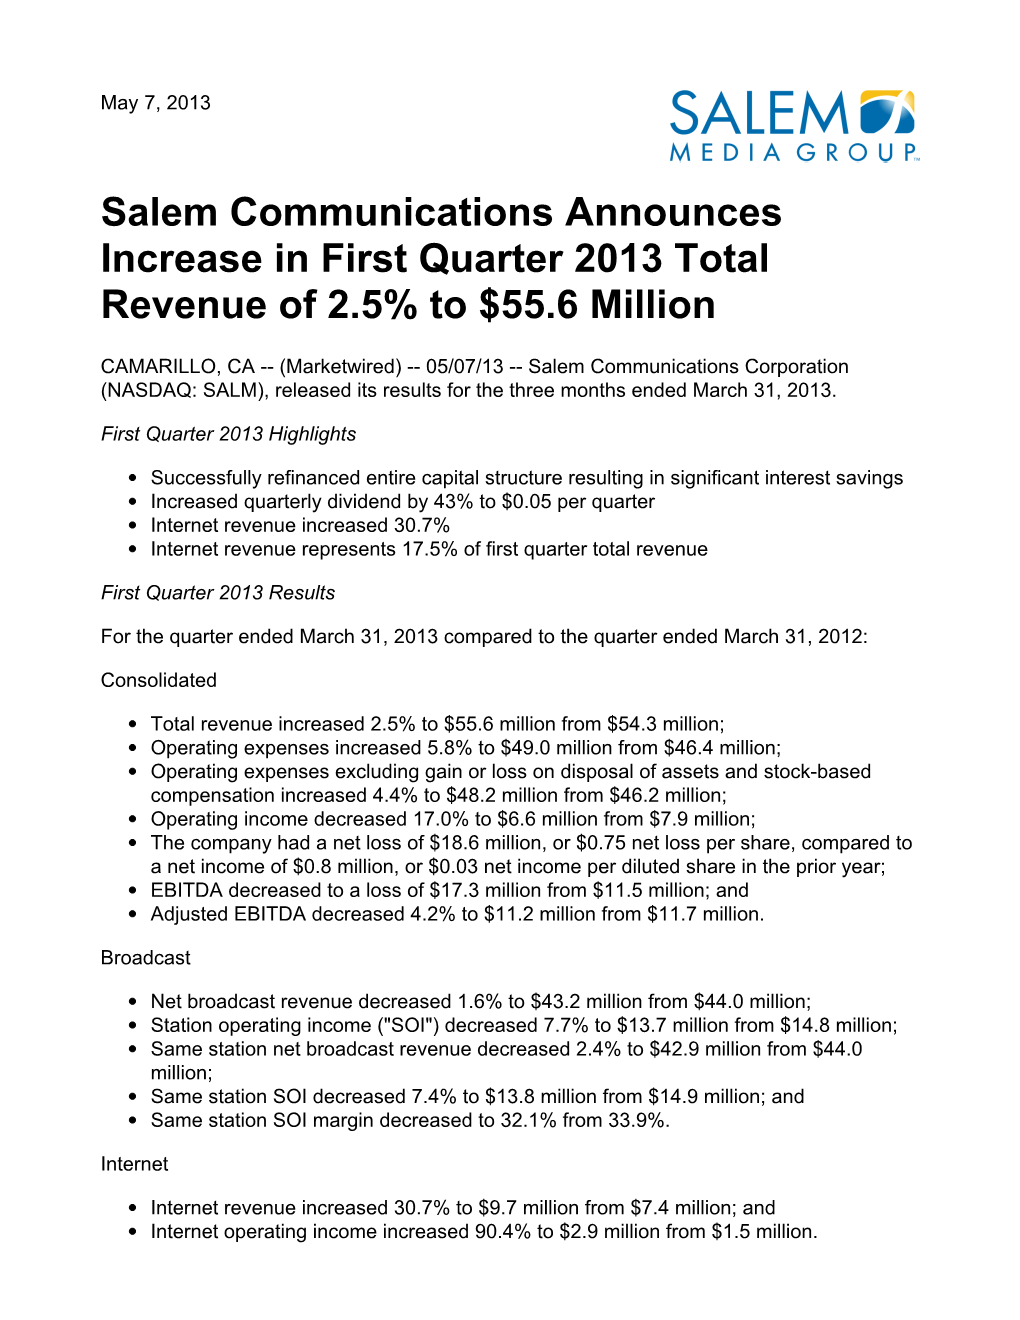 Salem Communications Announces Increase in First Quarter 2013 Total Revenue of 2.5% to $55.6 Million